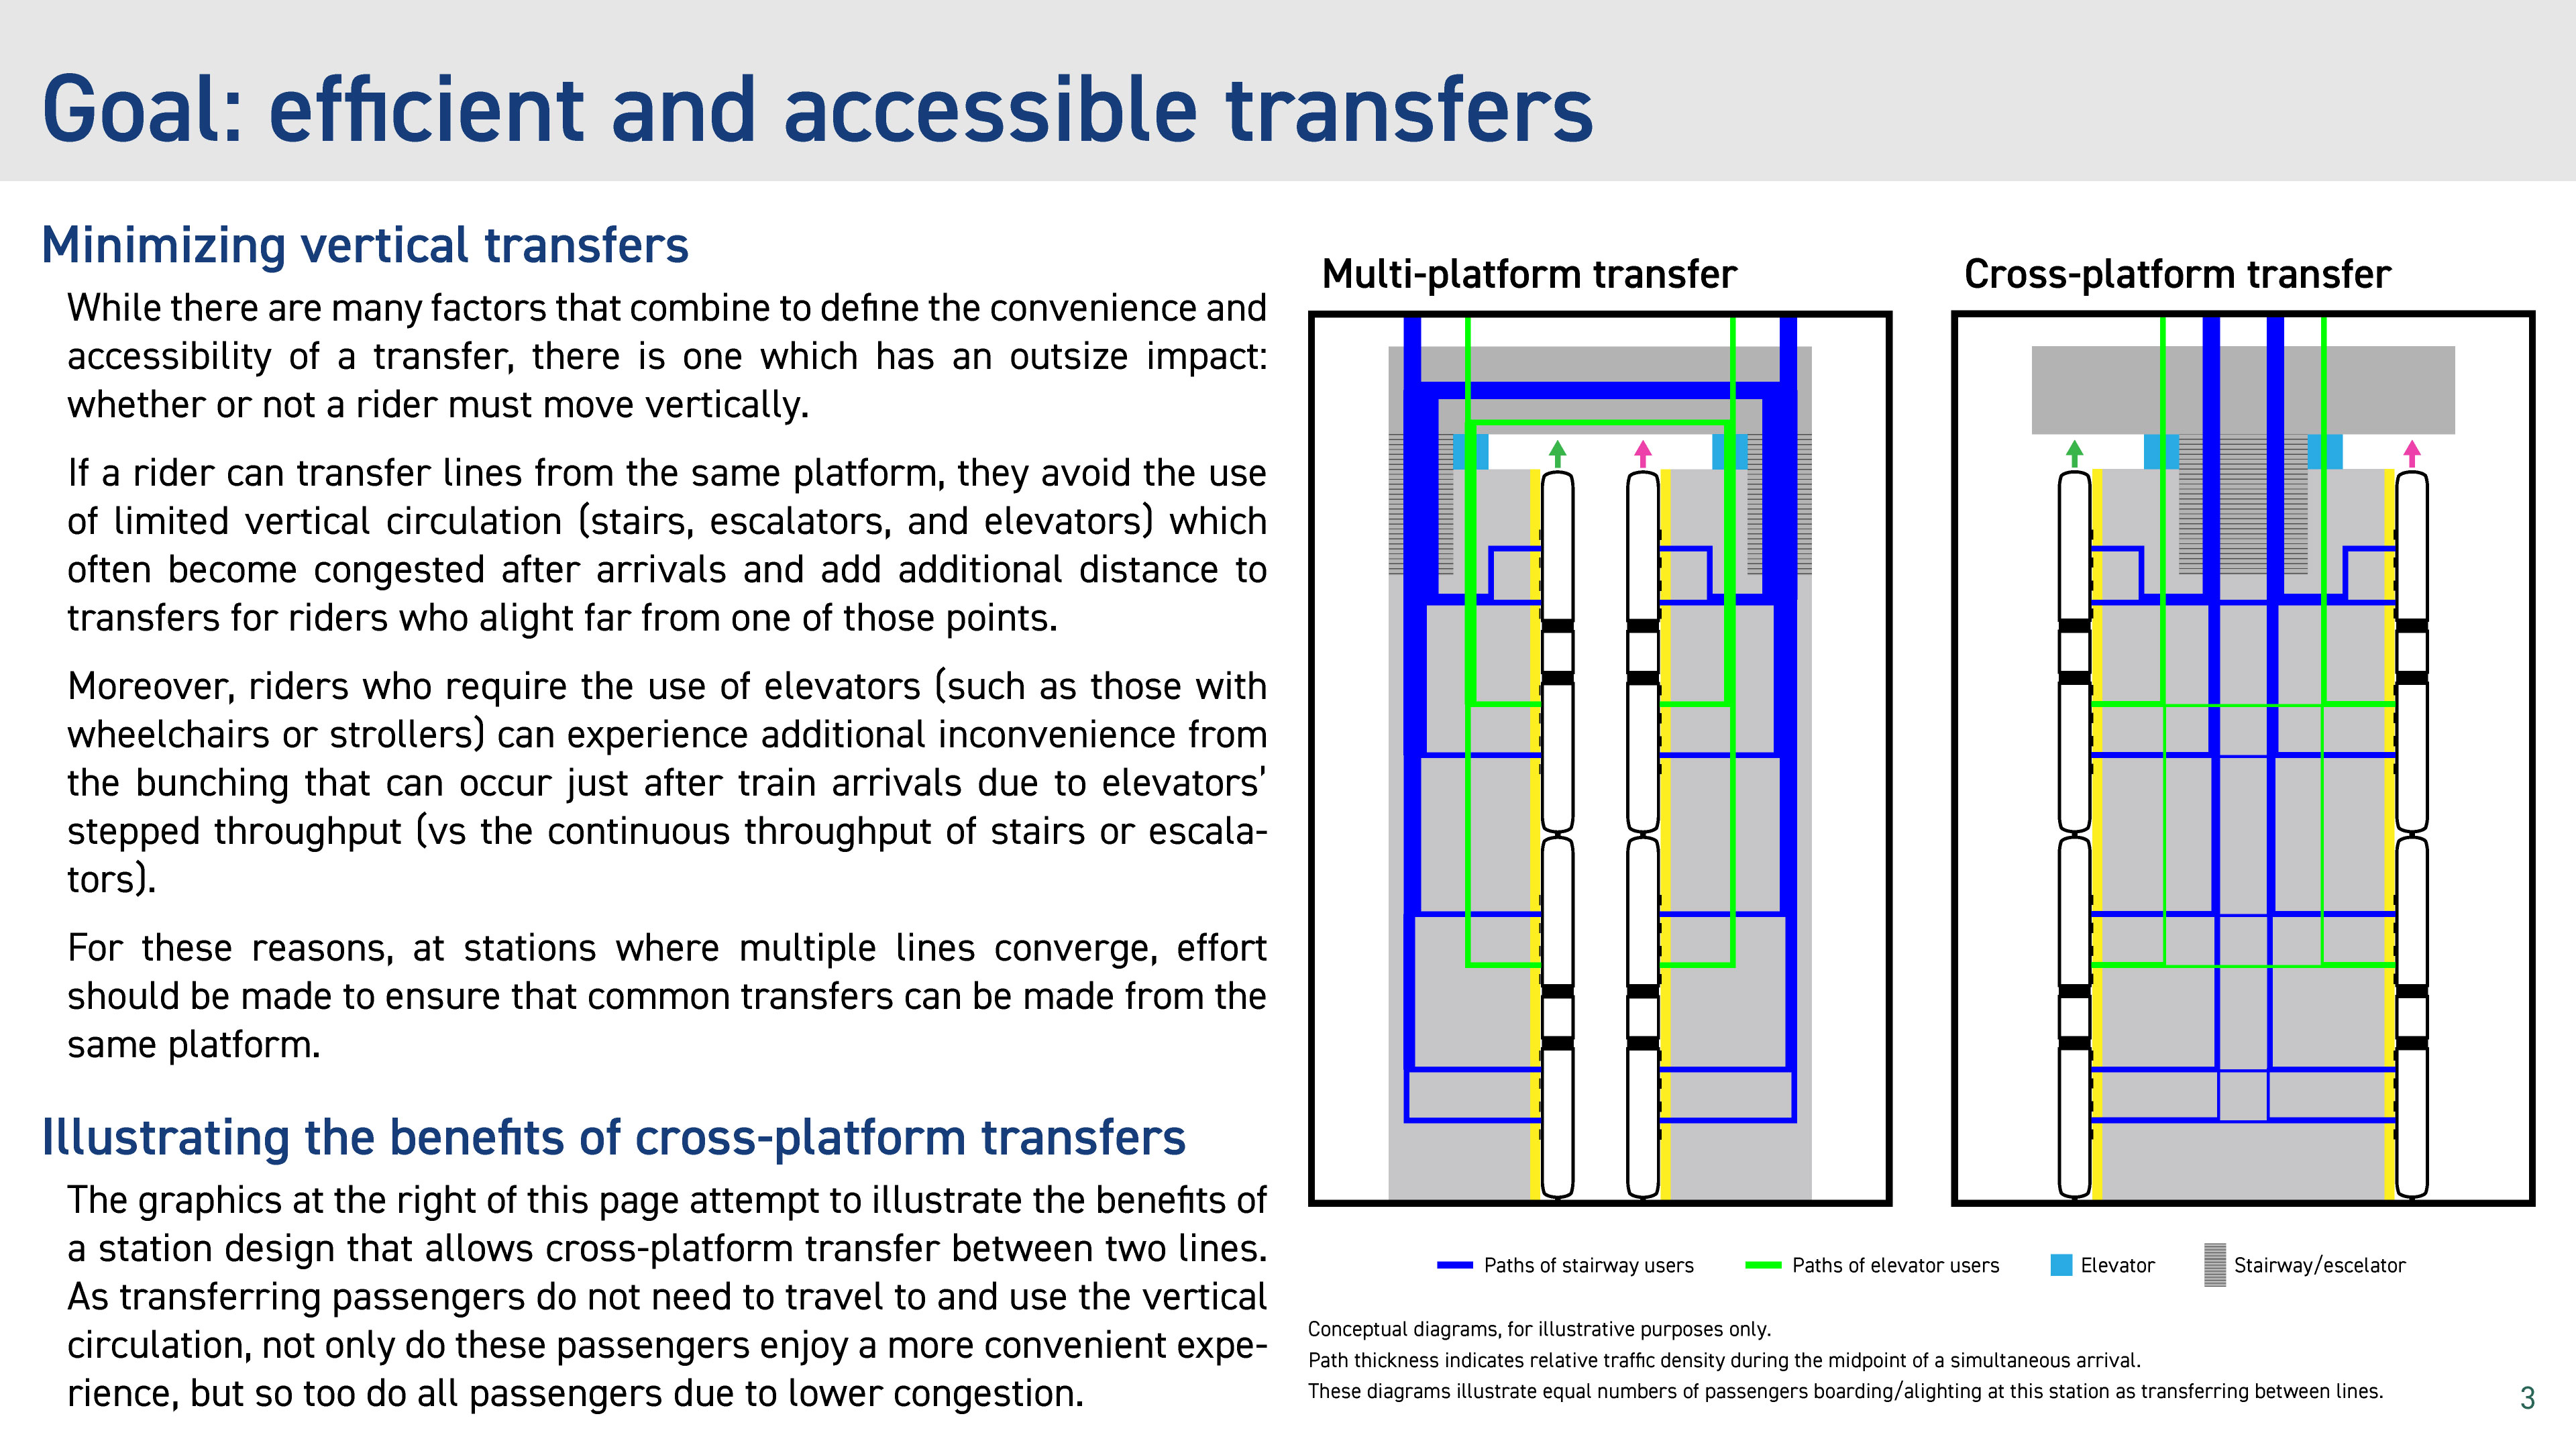 Goal: efficient and accessible transfers. At stations where multiple lines converge, effort should be made to ensure that common transfers can be made from the same platform.